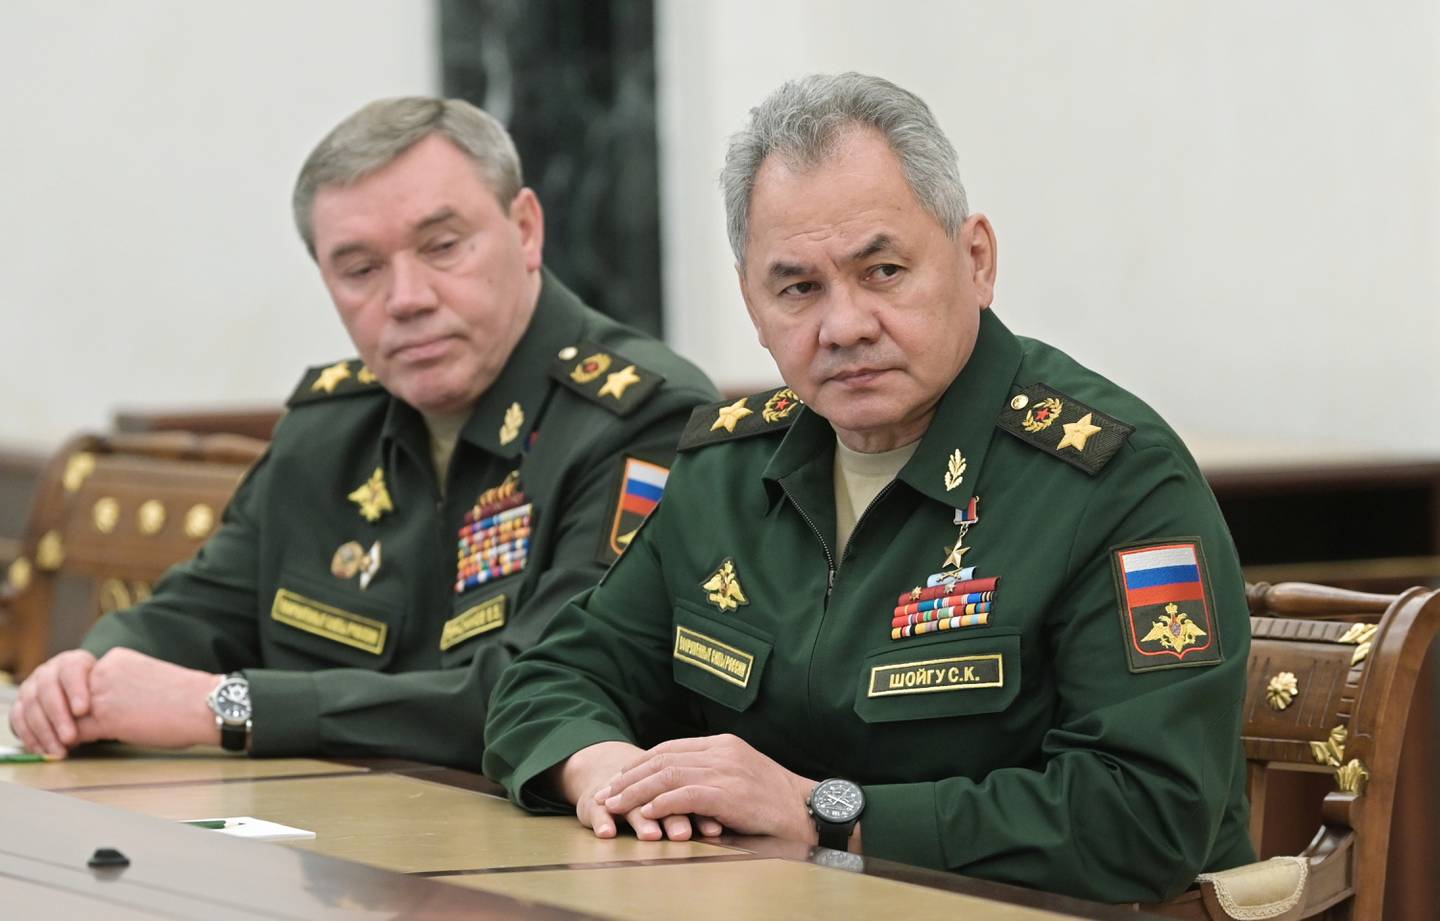 Russian Defence Minister Sergey Shoigu, right, and First Deputy Defence Minister Valery Gerasimov at a meeting with President Vladimir Putin in Moscow on February 27. AP